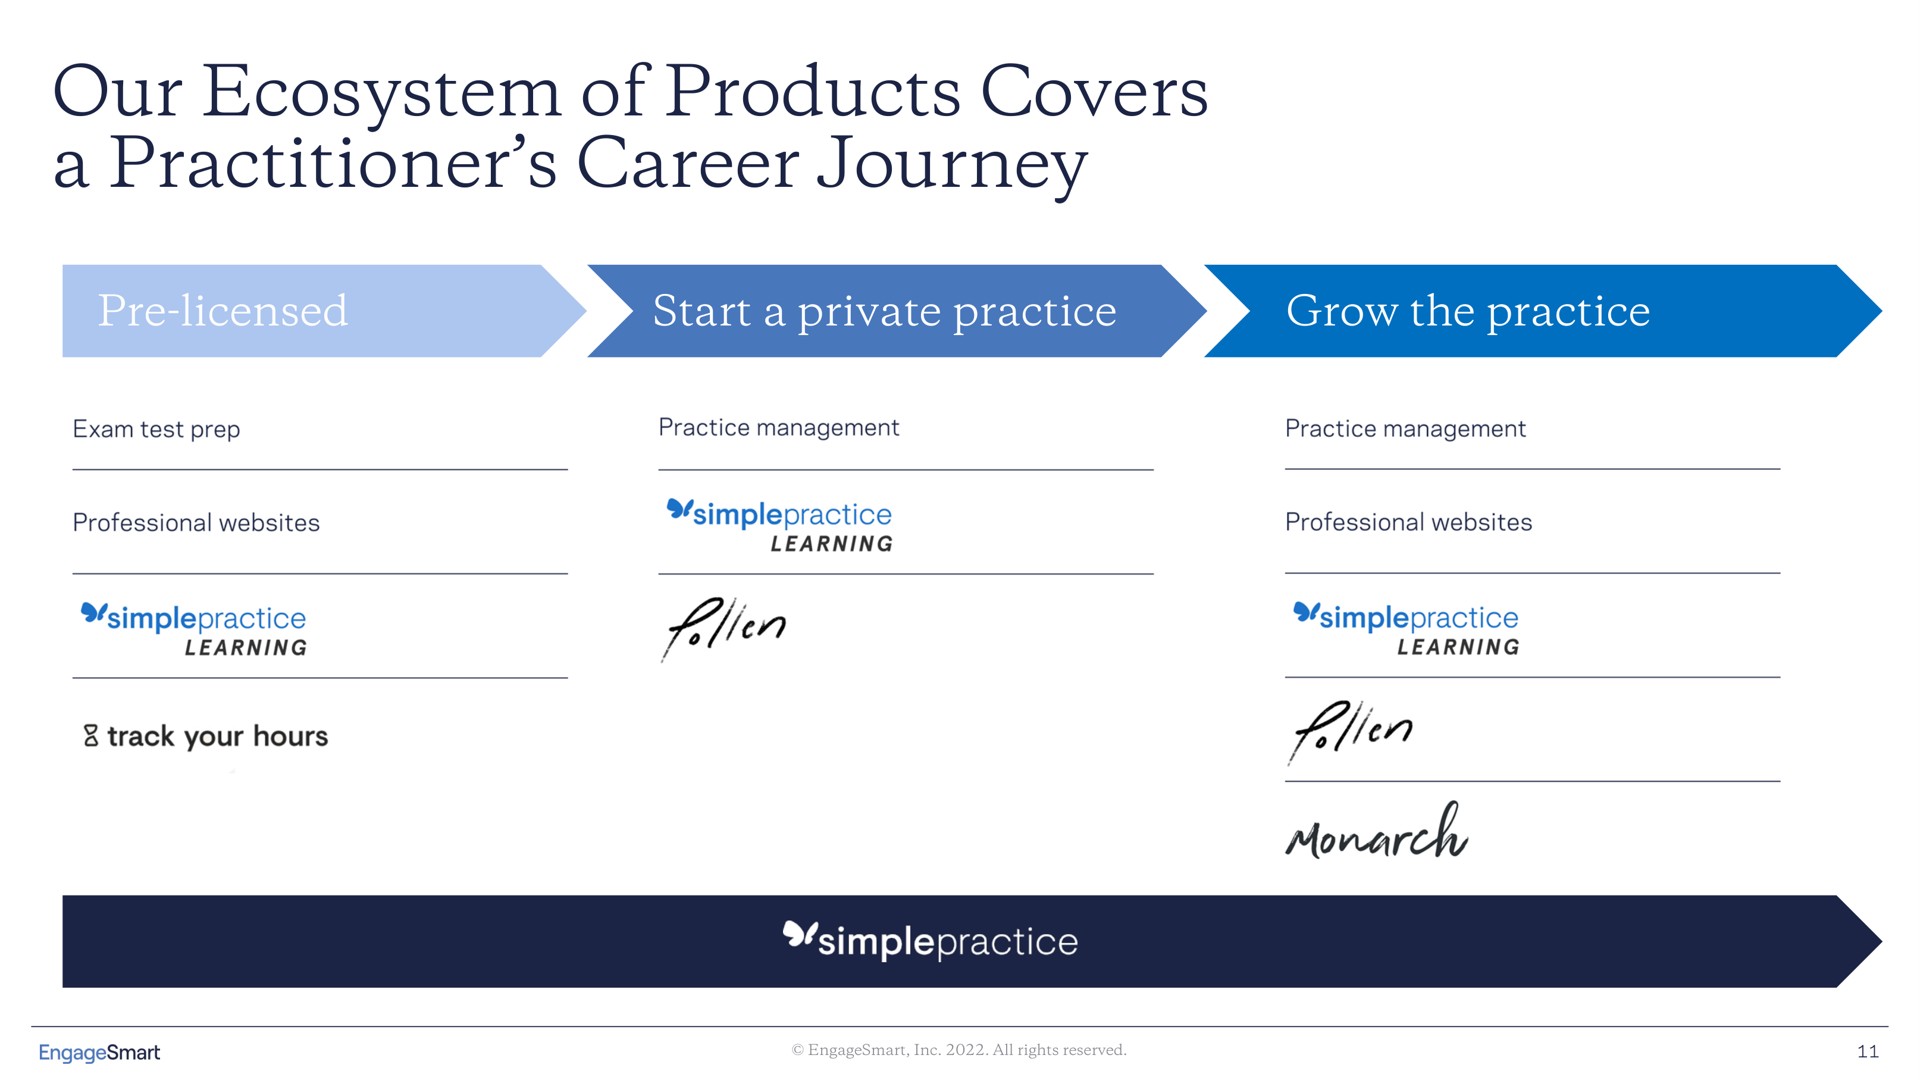 our ecosystem of products covers a practitioner career journey | EngageSmart